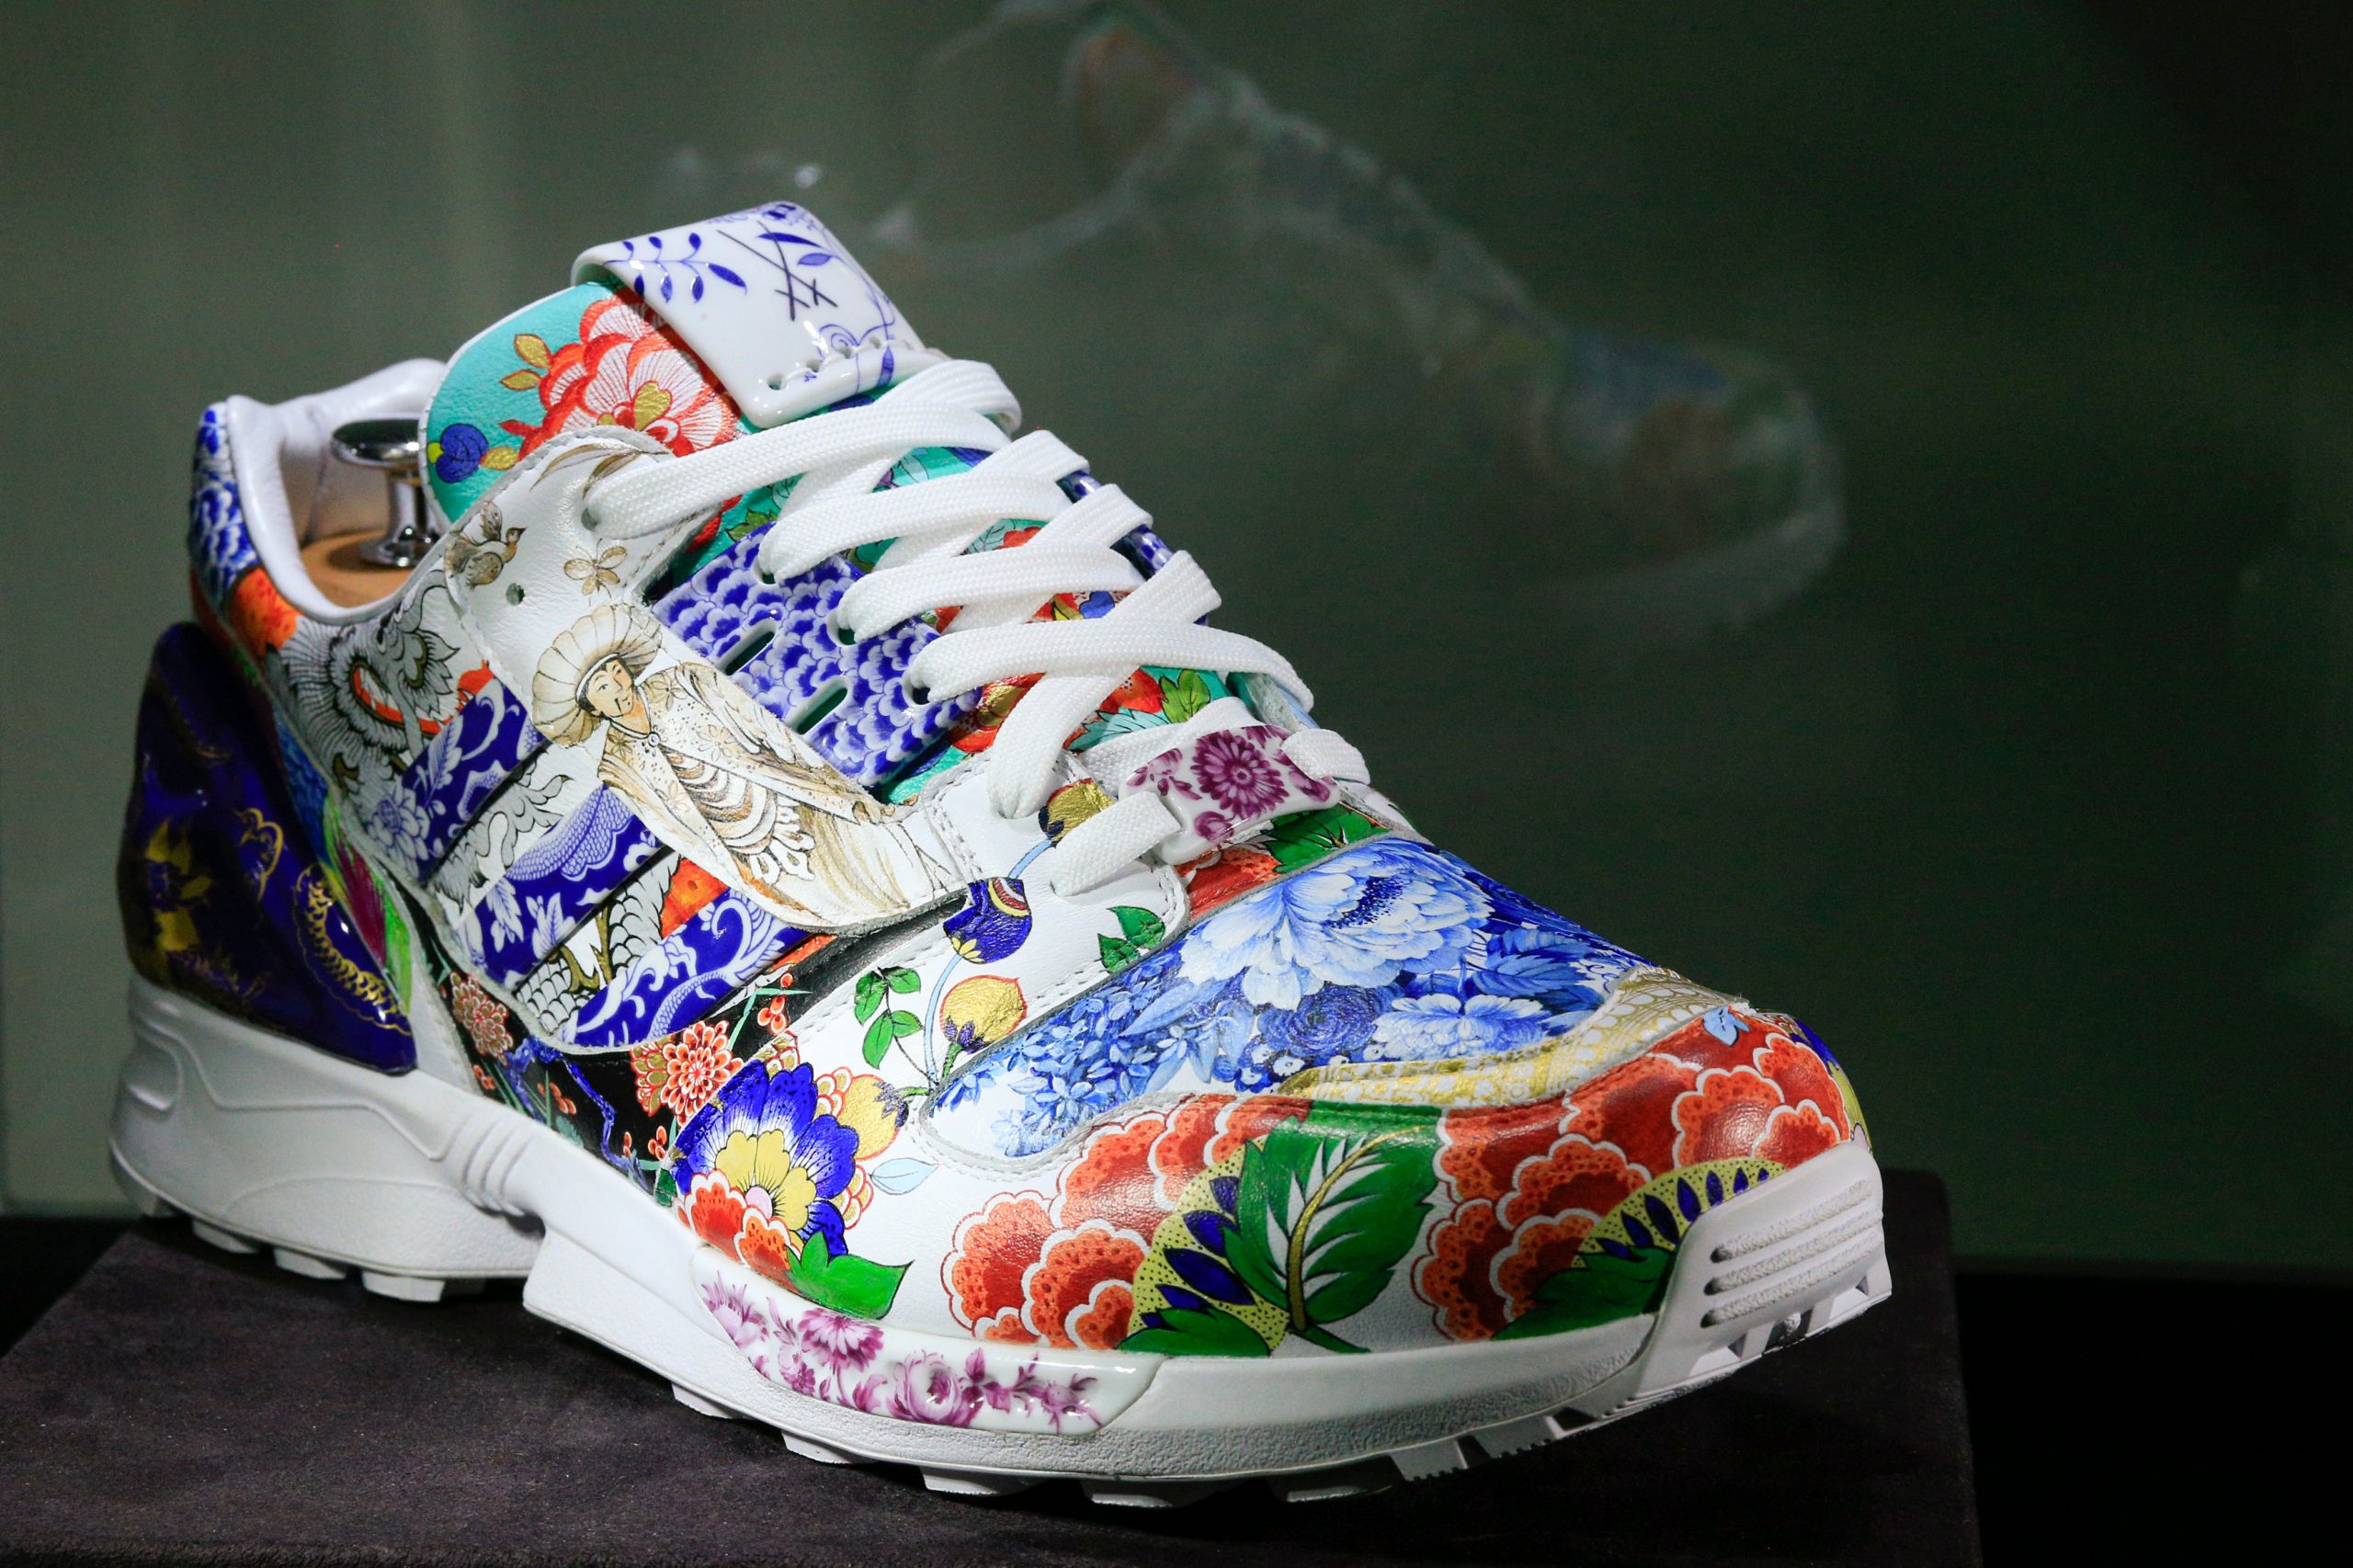 One-of-a-kind sneakers eyes record $1 million at auction